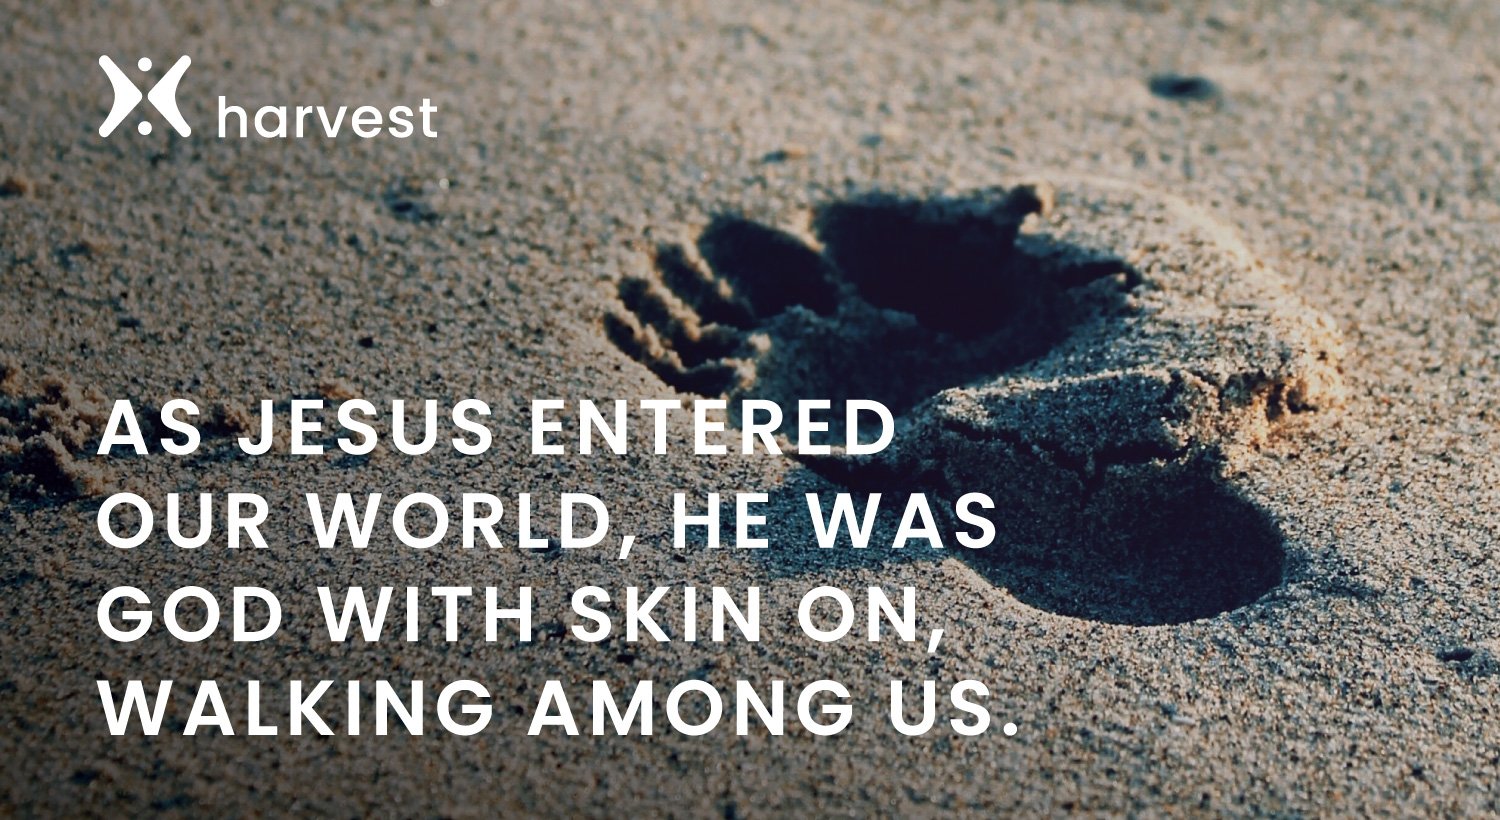 As Jesus entered our world, He was God with skin on, walking among us.